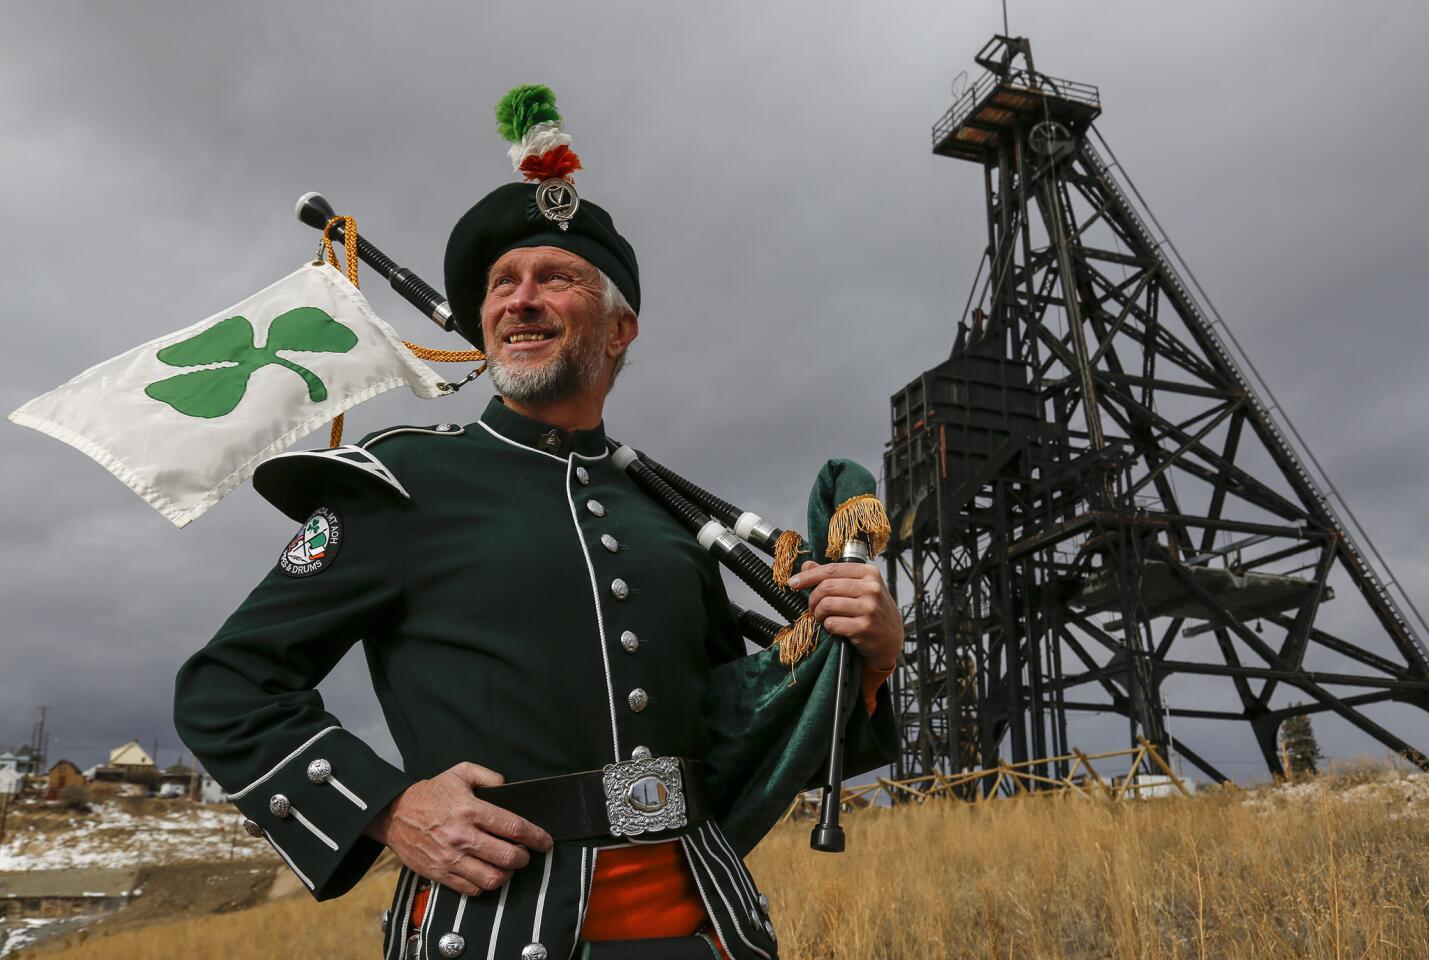 "Irish roots, Montana soul" in Butte, Mont.